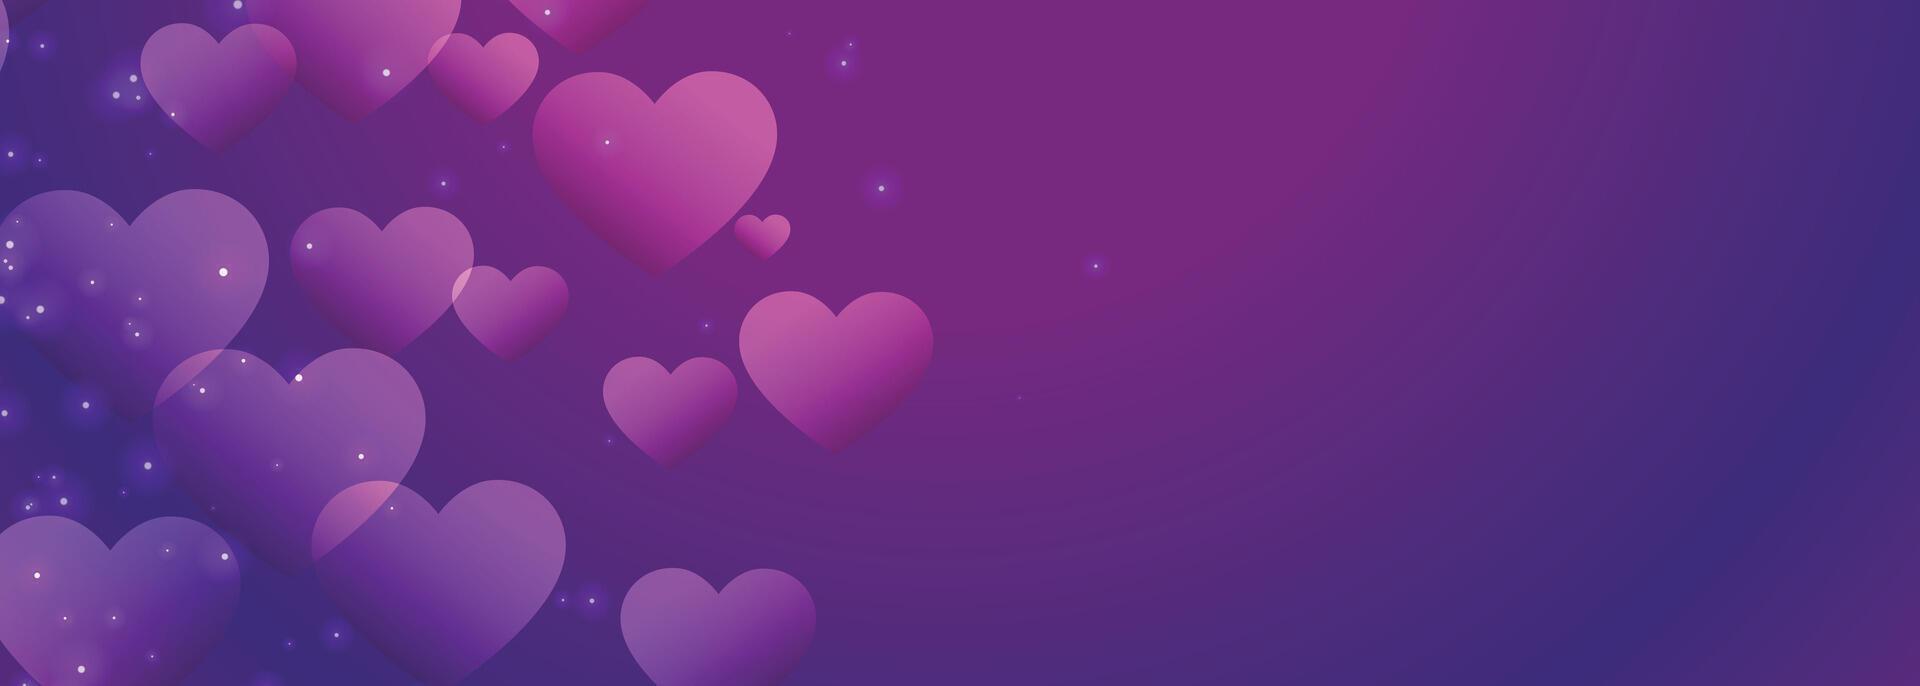 purple shiny hearts banner with text space vector